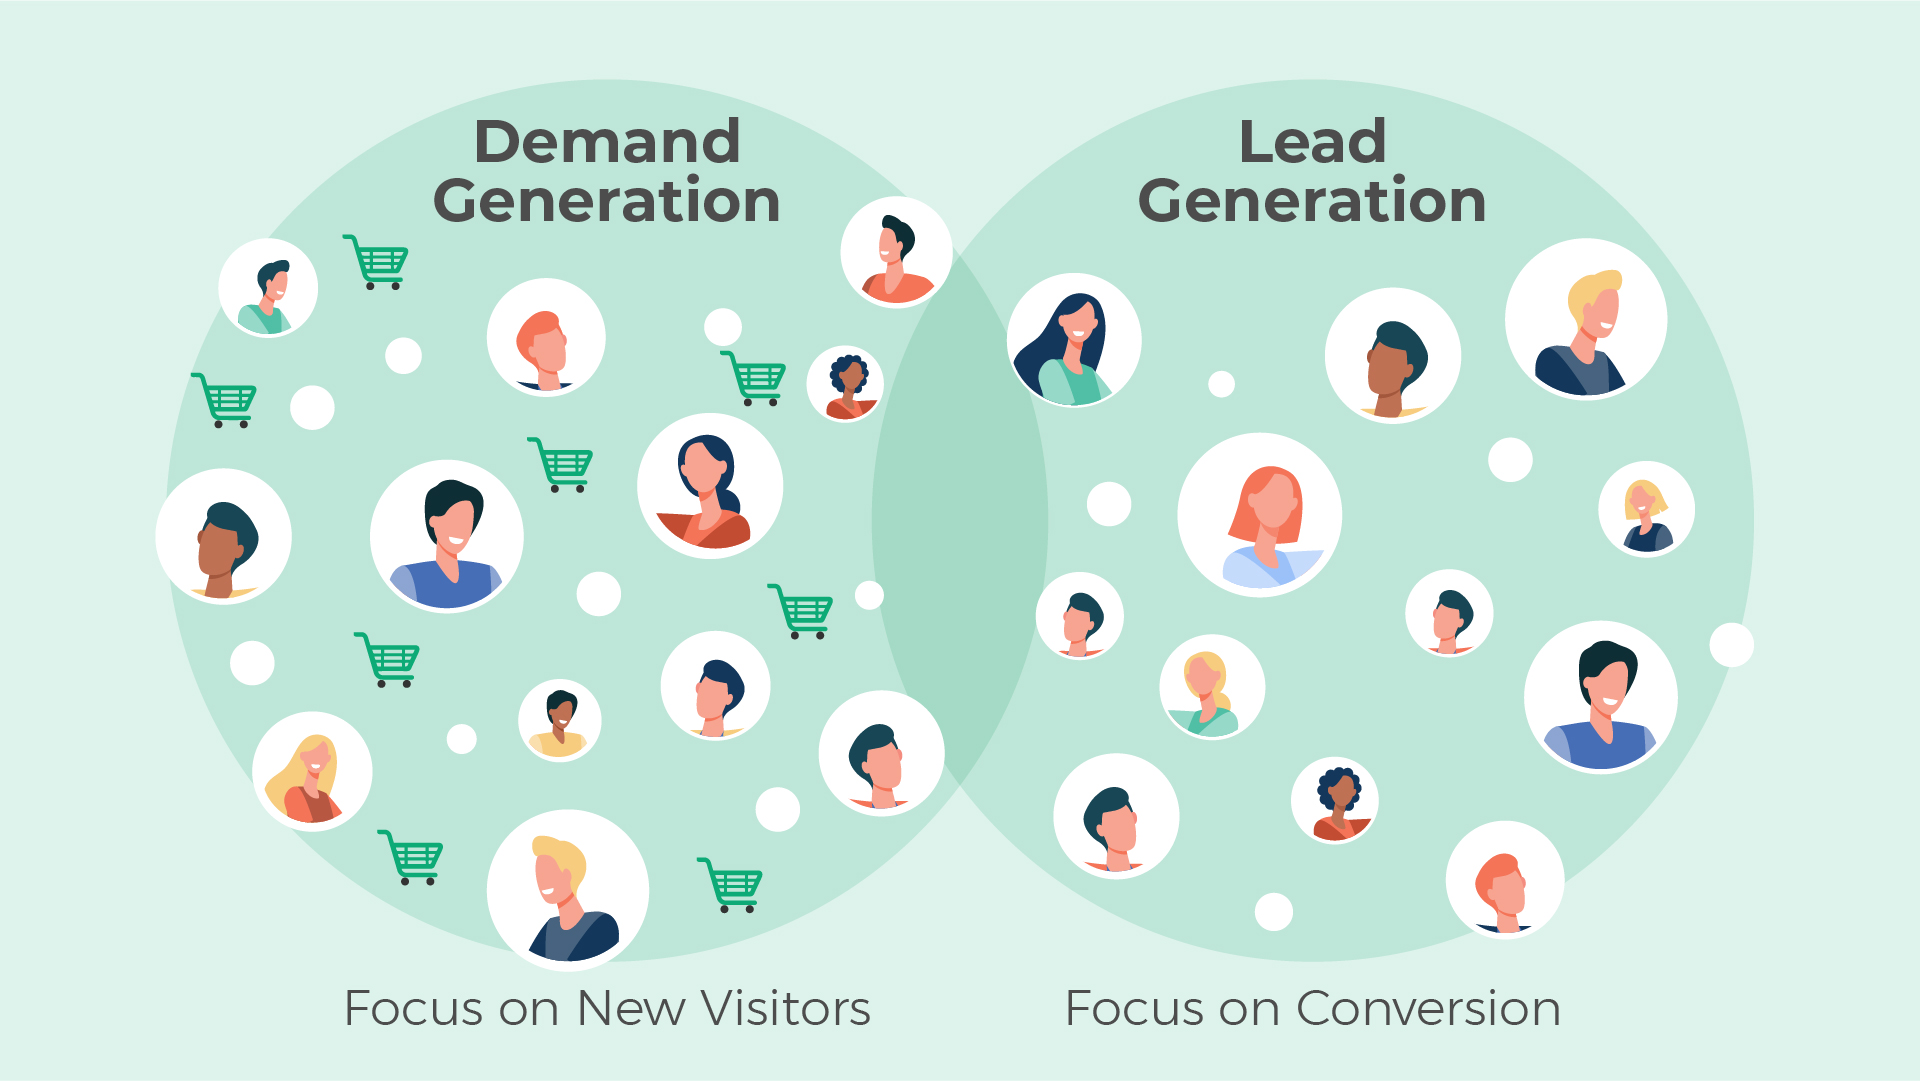 What's the difference between demand generation and lead generation?